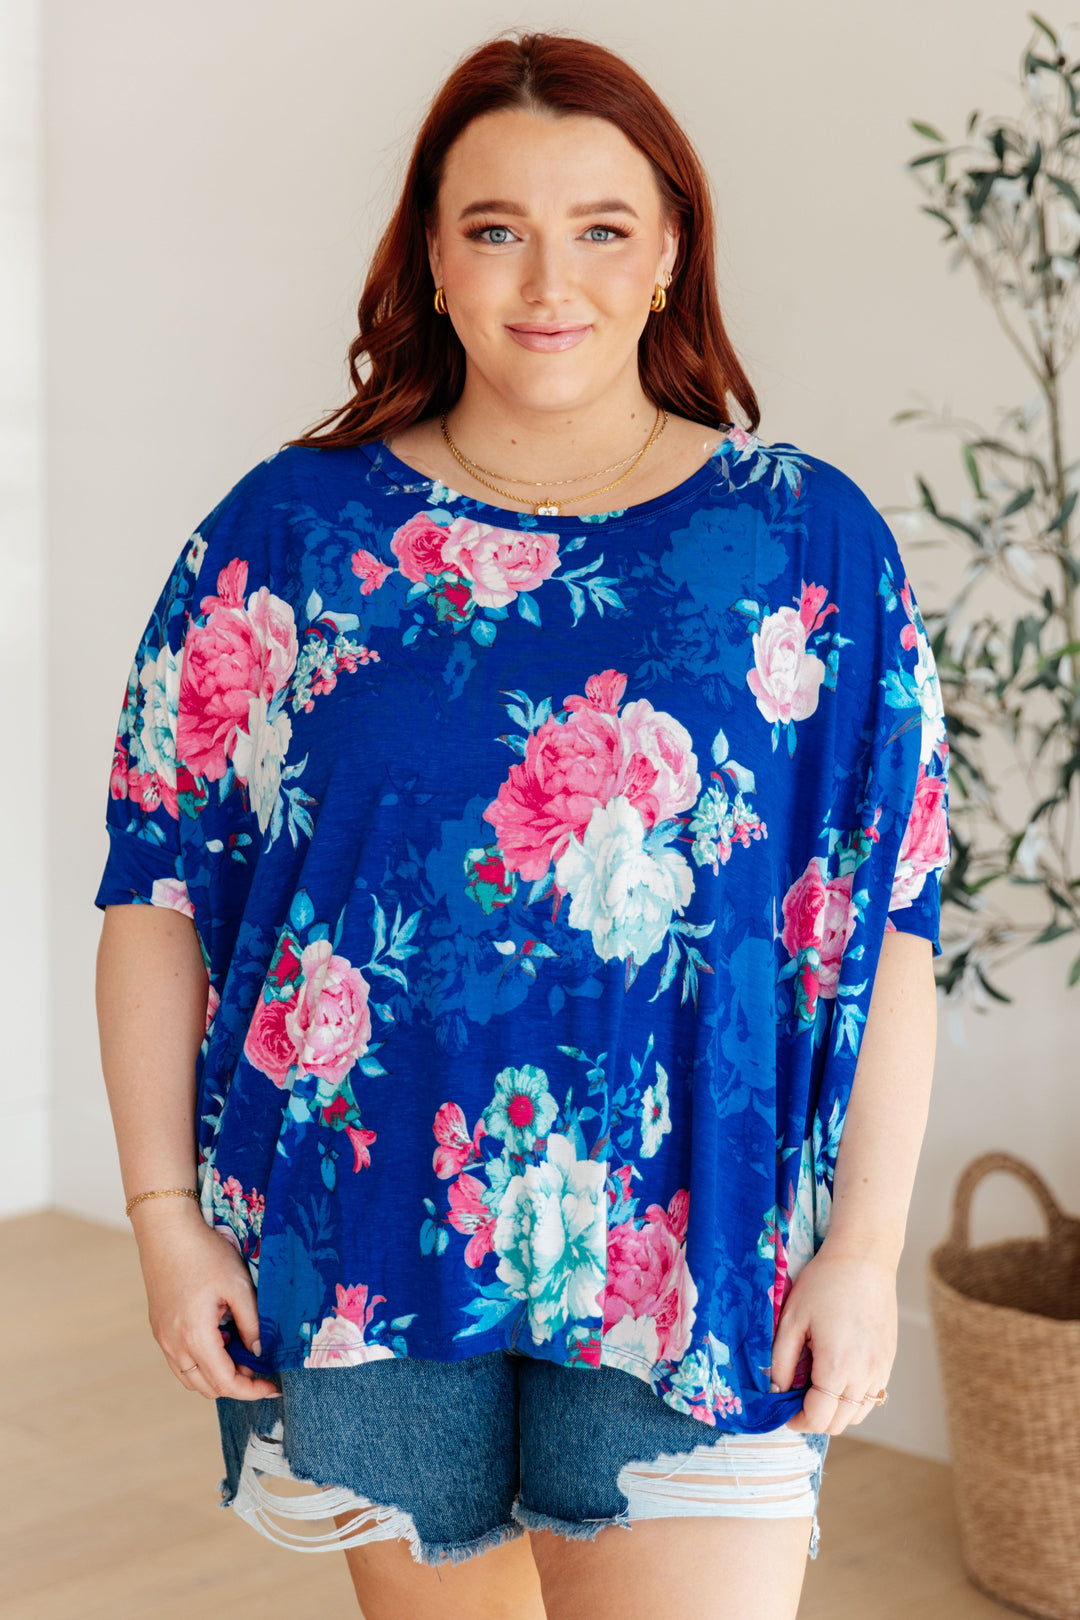 Essentially You Batwing Top - Royal and Pink Floral